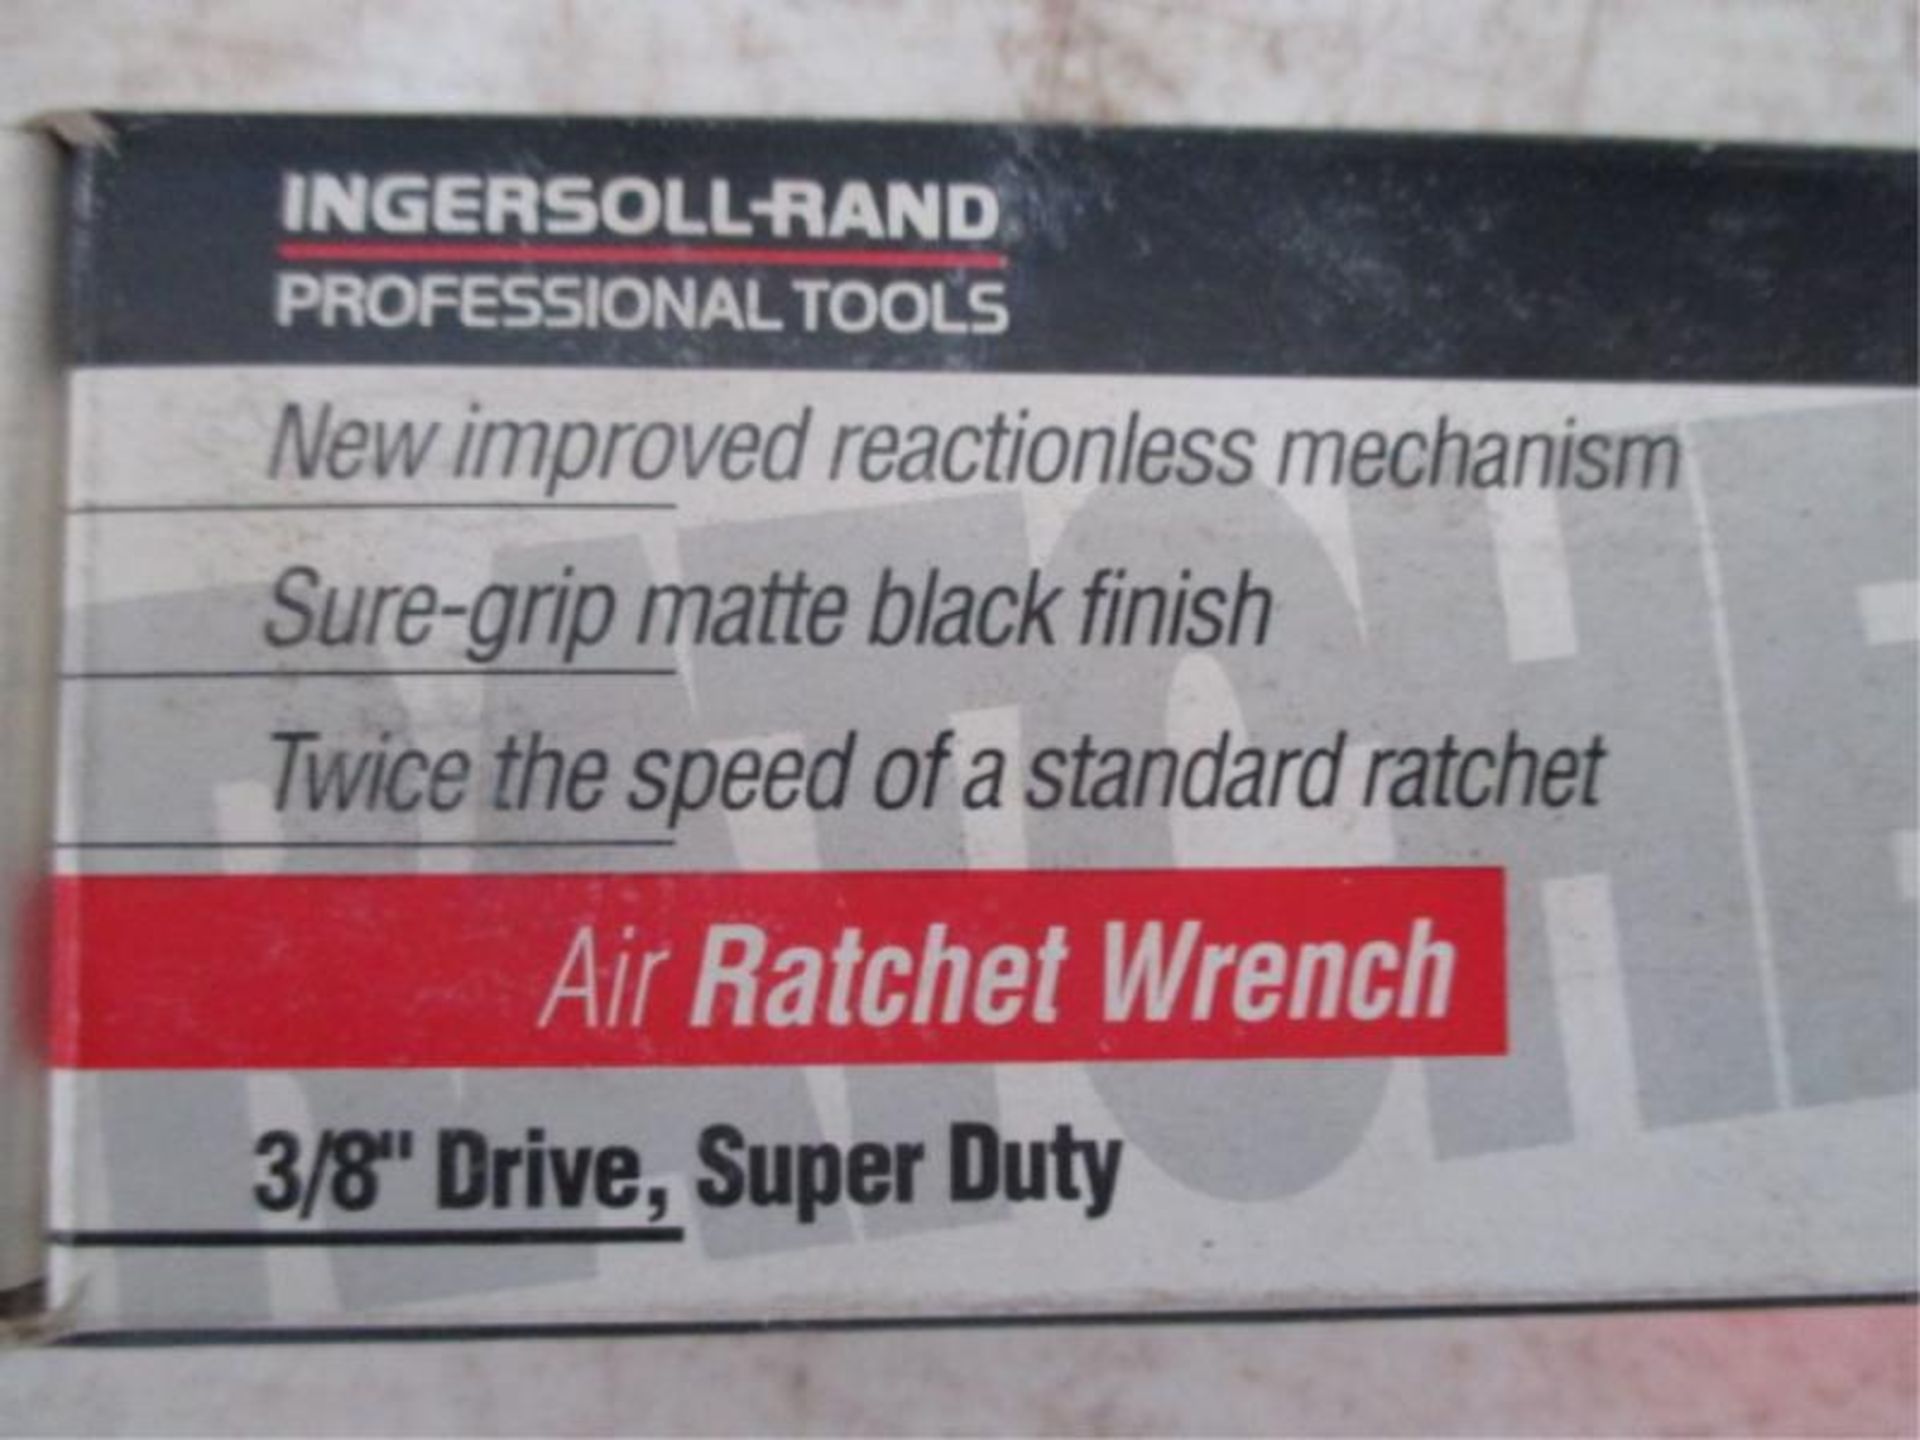 Air Ratchet Wrench, 3/8" Drive, Ingersol Rand, Super Duty, New in Box Super Duty, New in Box - Image 2 of 4